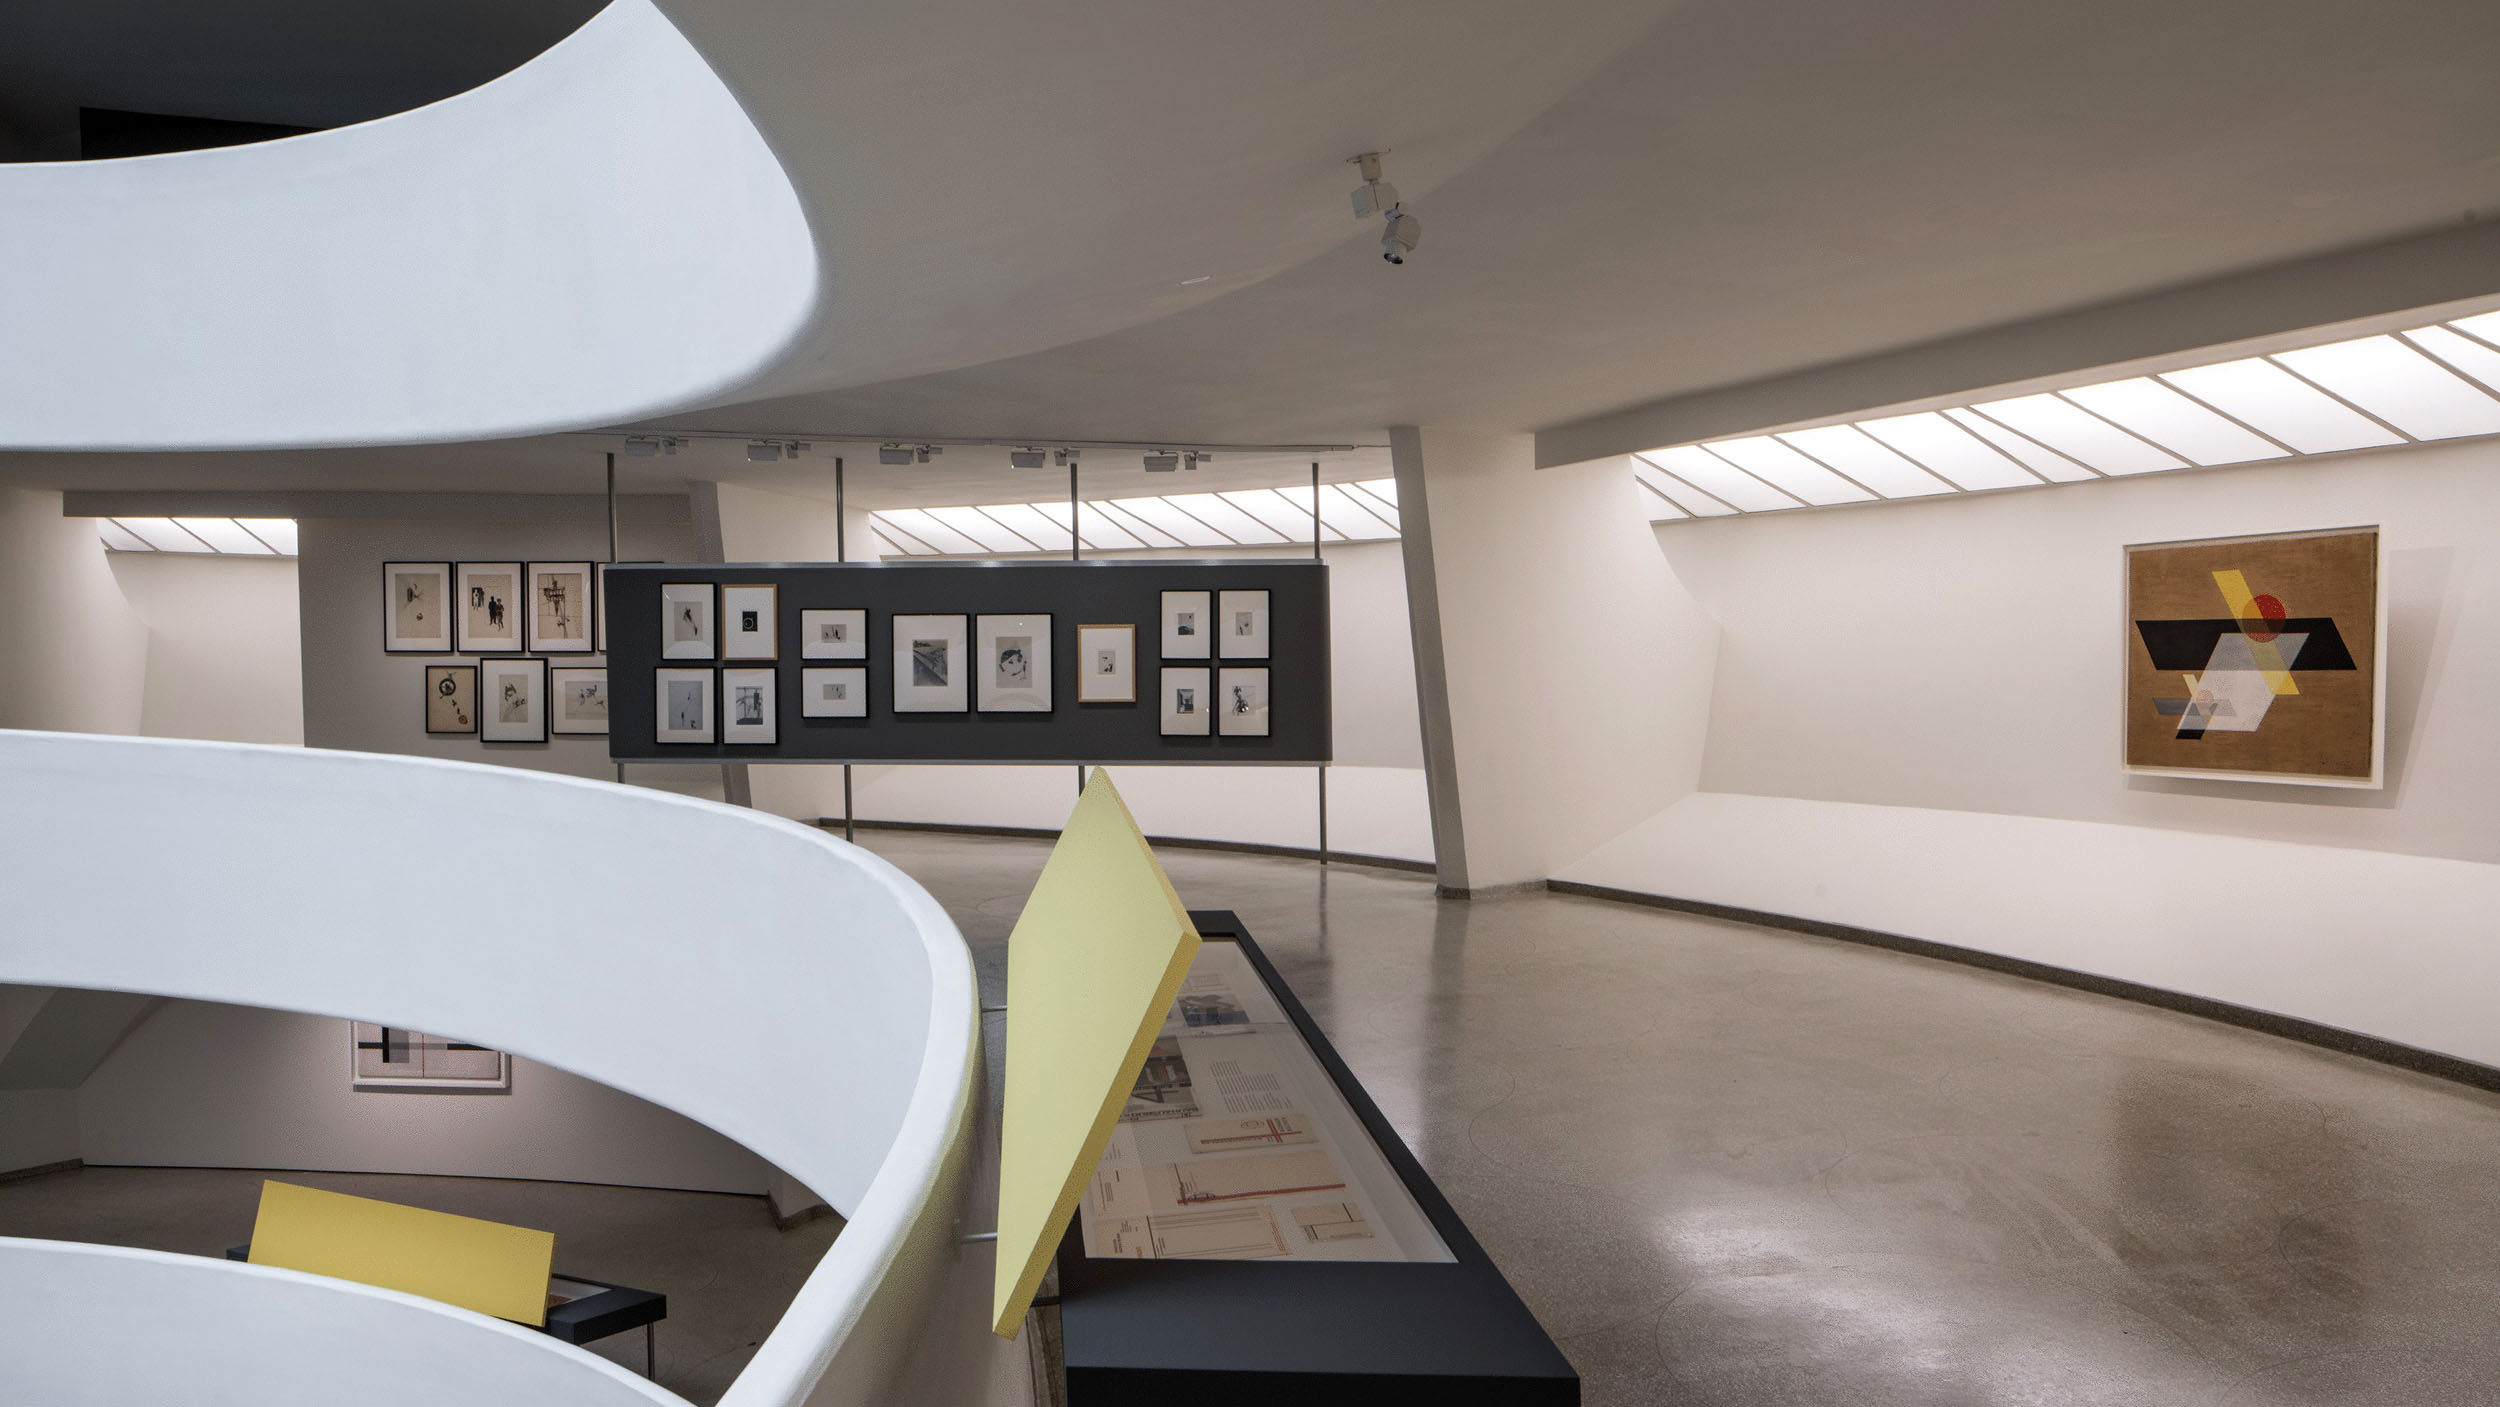 Installation view: 'Moholy-Nagy: Future Present', Solomon R. Guggenheim Museum, New York, May 27–September 7, 2016 showing at right, 'A II (Construction A II)' (1924)